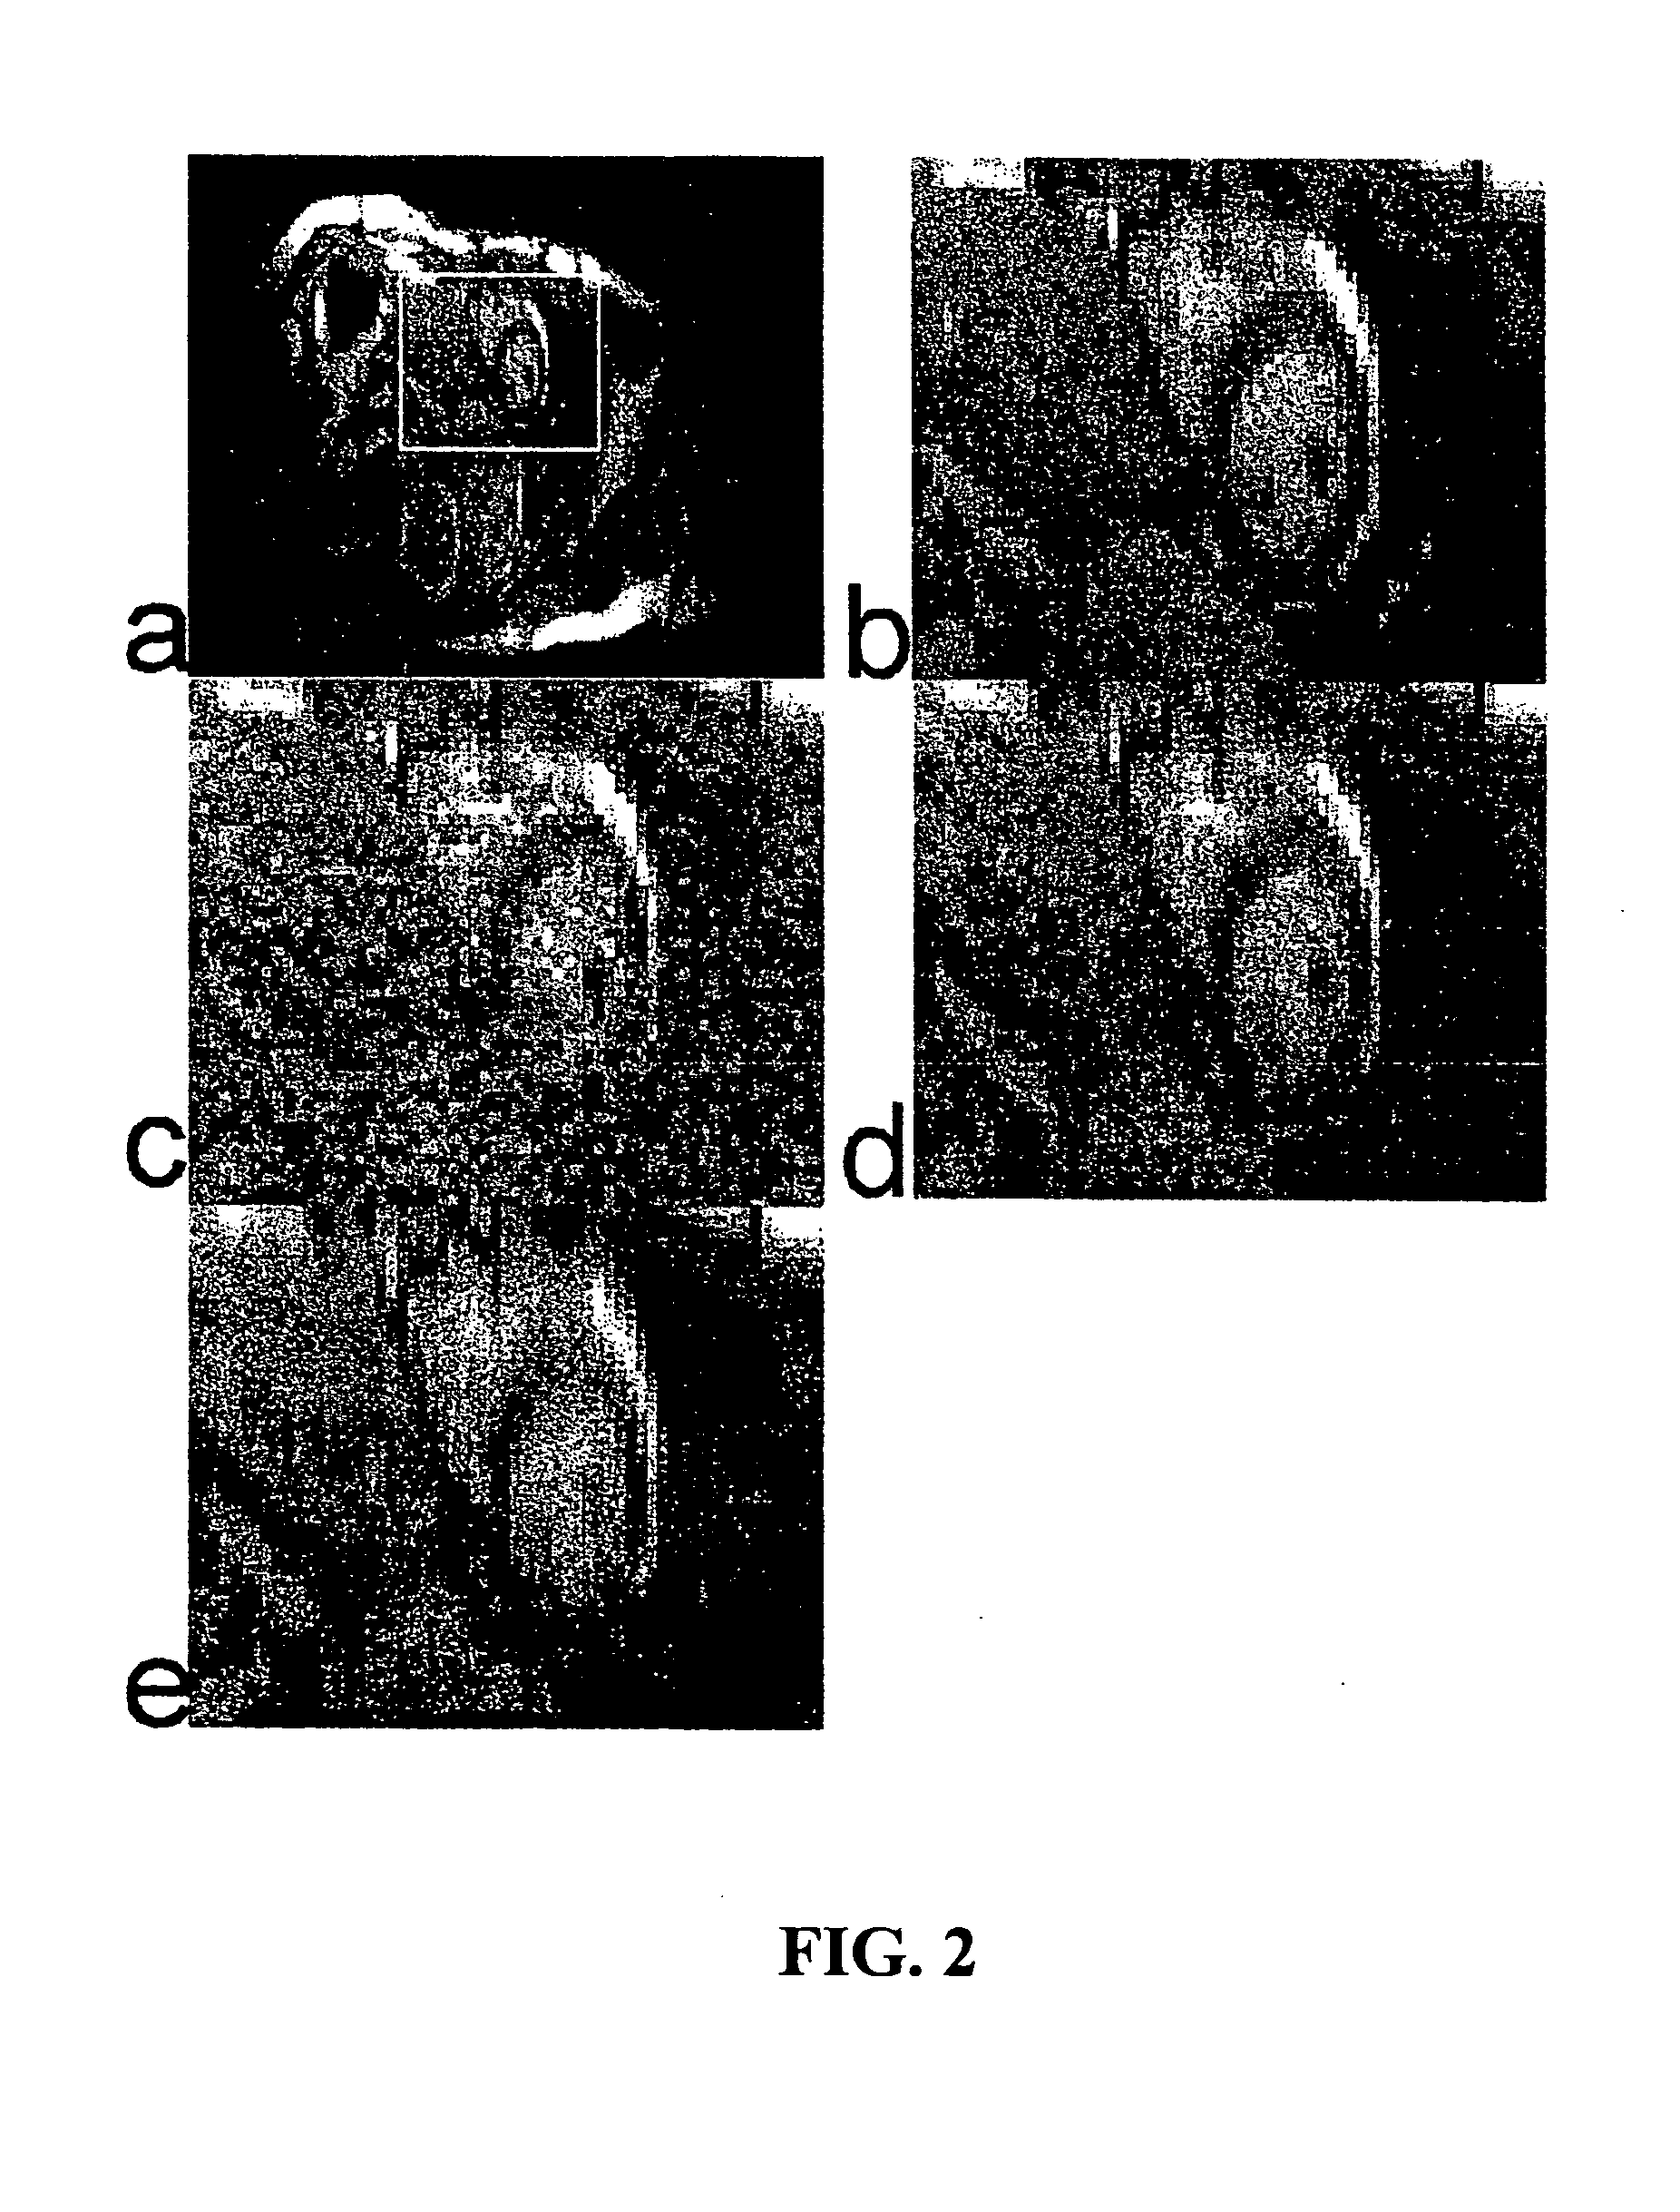 Method and Apparatus for Parameter Free Regularized Partially Parallel Imaging Using Magnetic Resonance Imaging